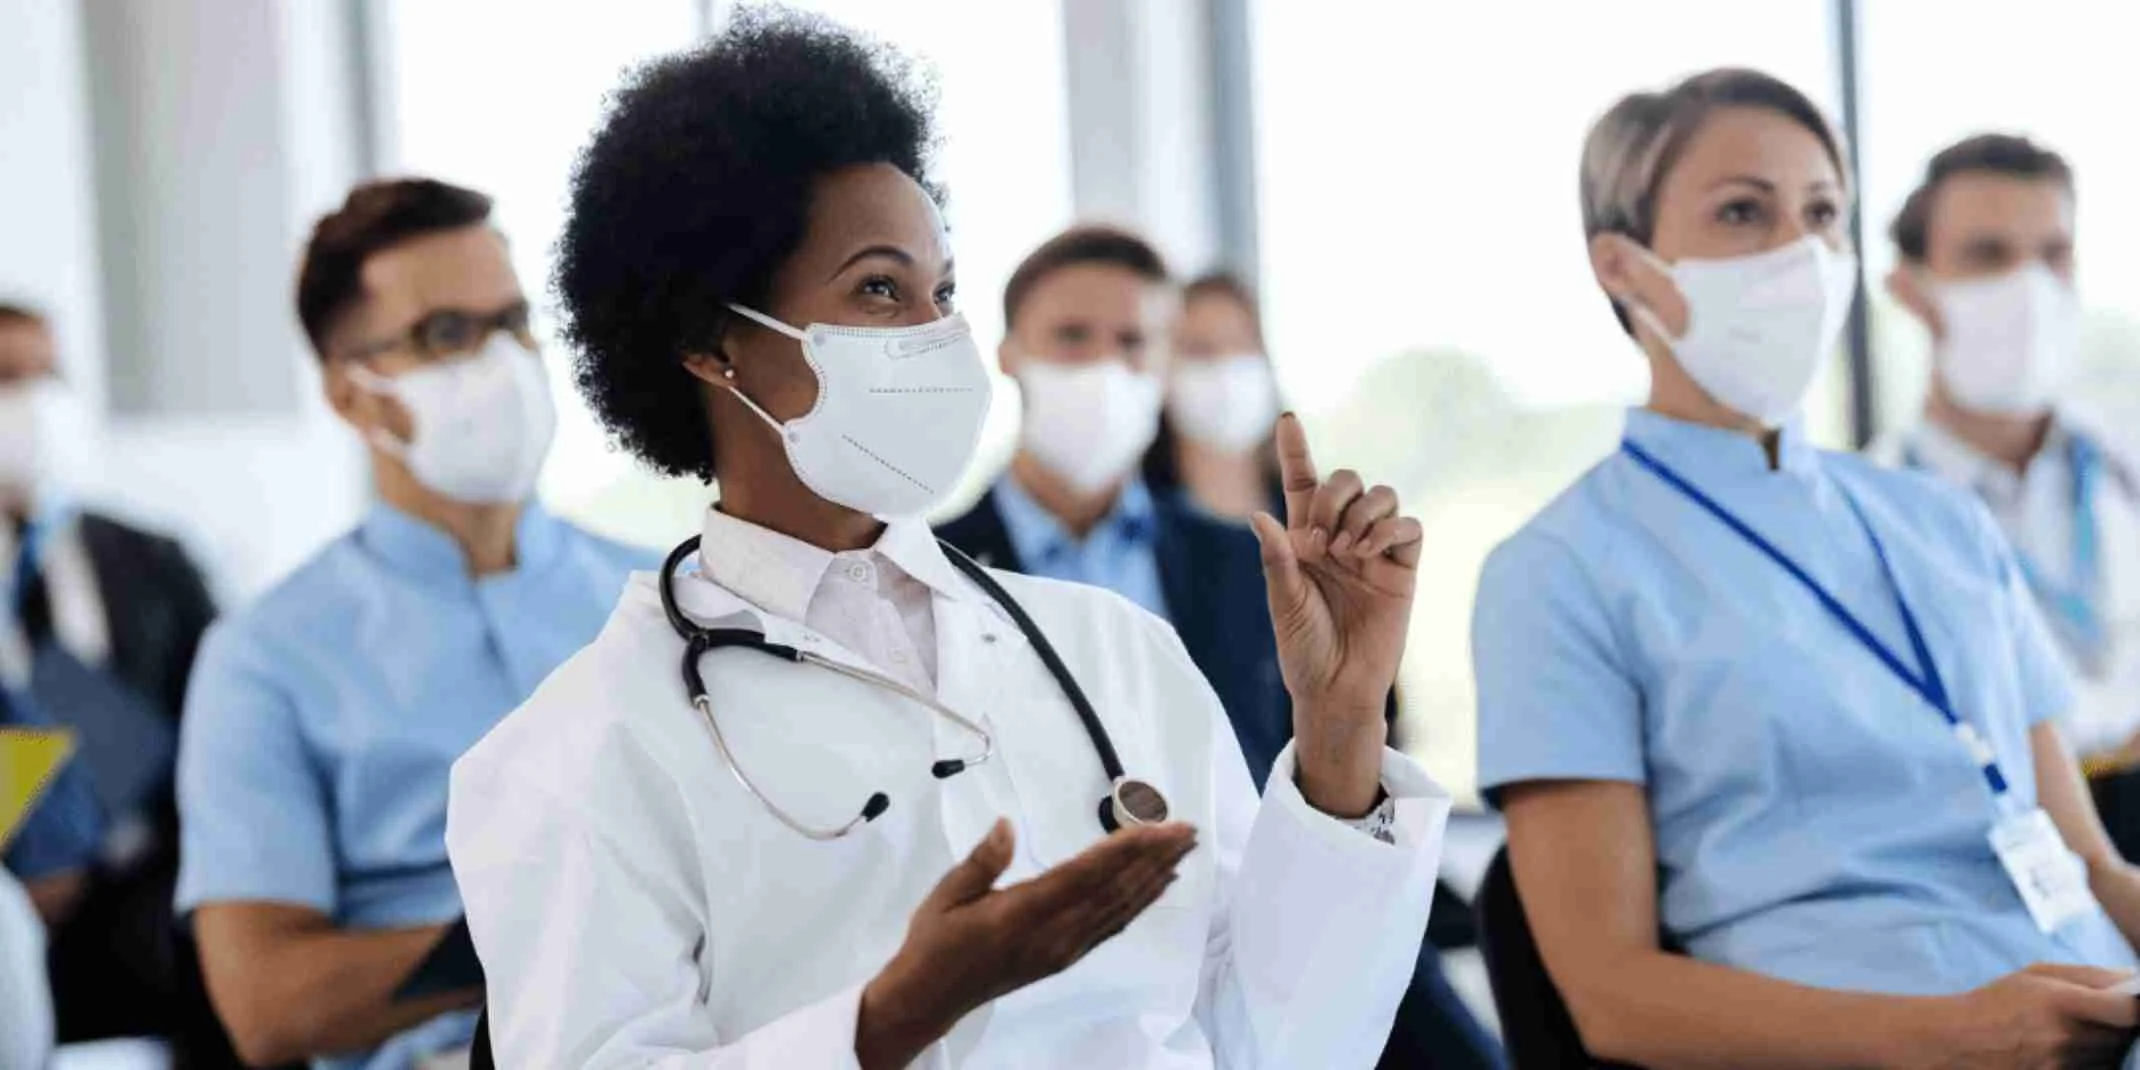 A Black woman physician animatedly asks a question in a class of clinicians.